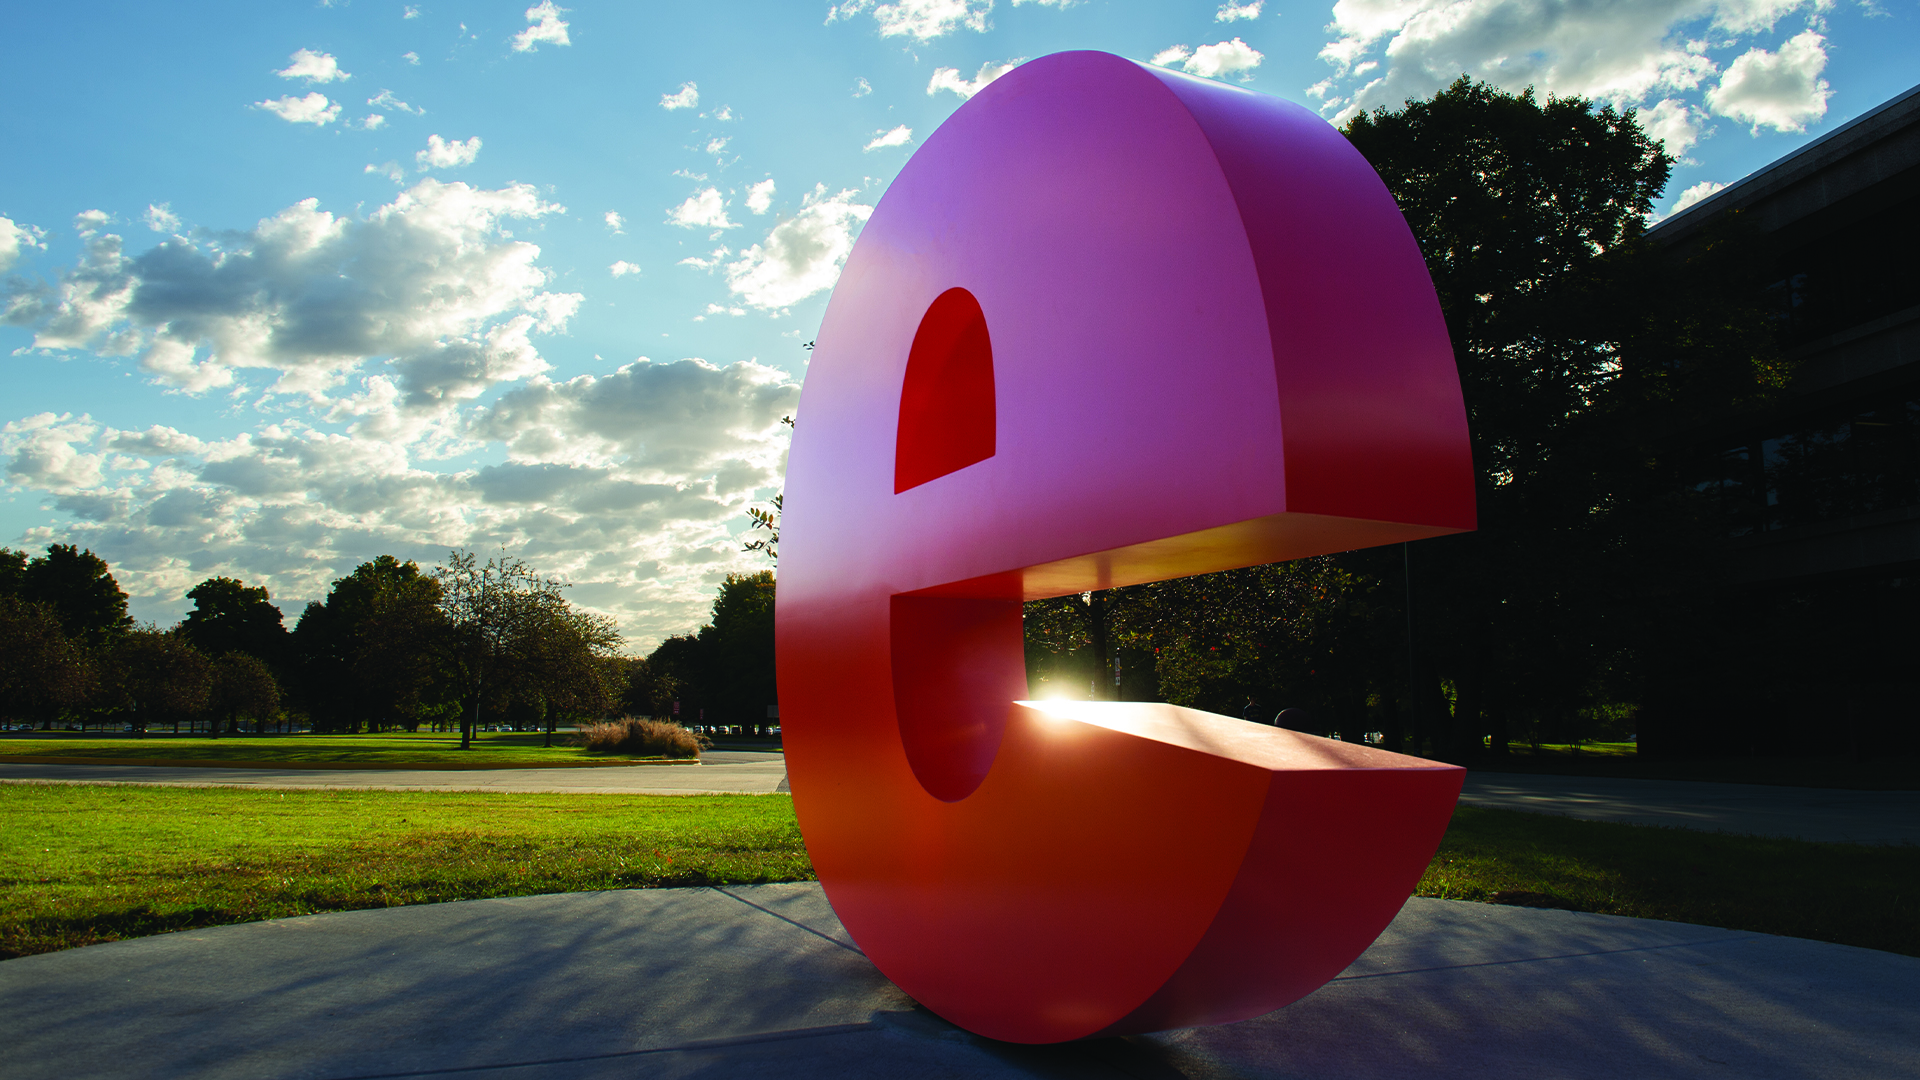 The 'e' statue at SIUE